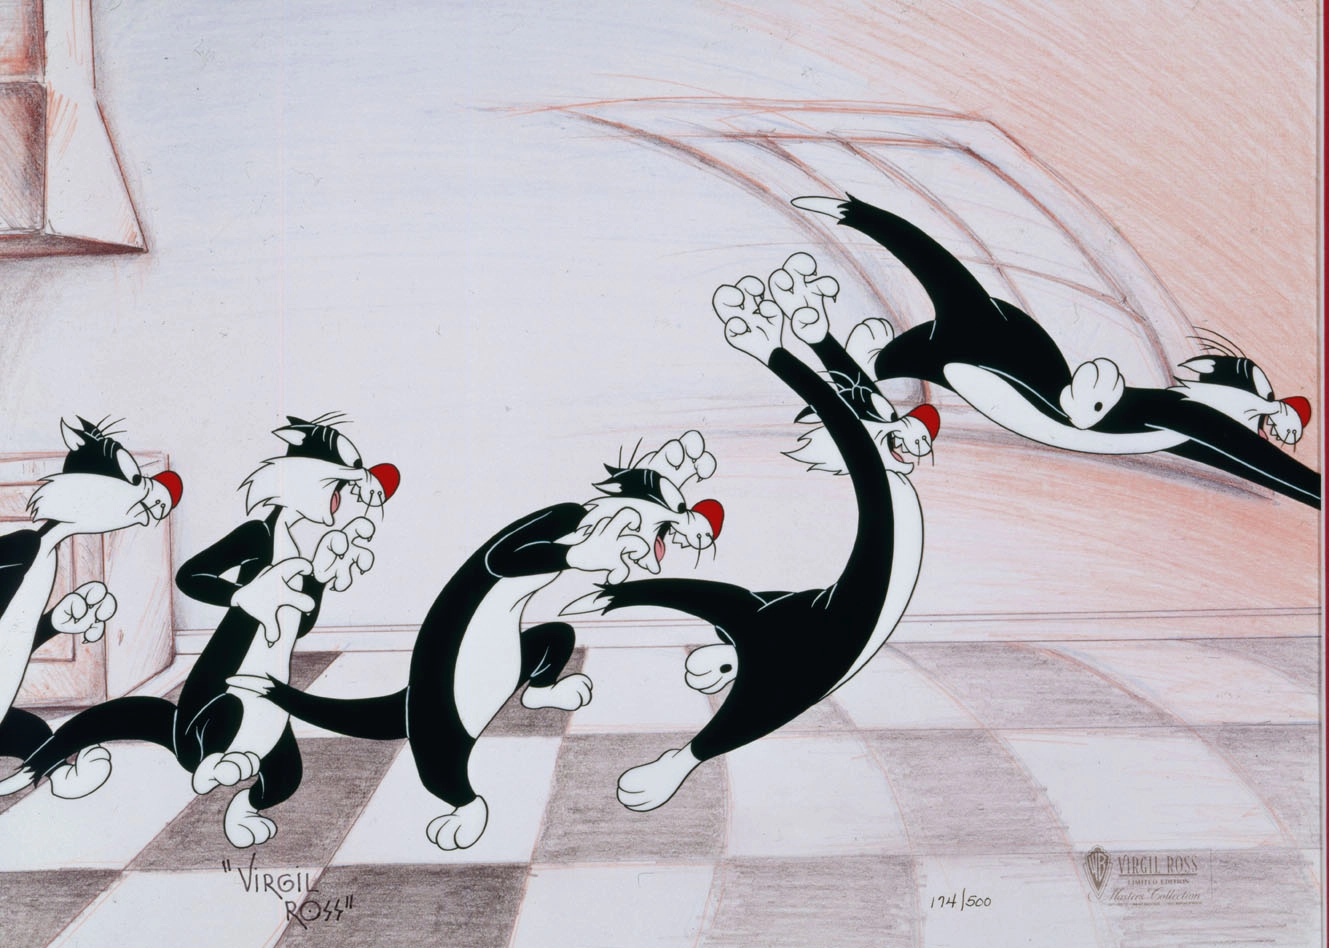 Virgil Ross The Pounce Hand-Painted Limited Edition Cel